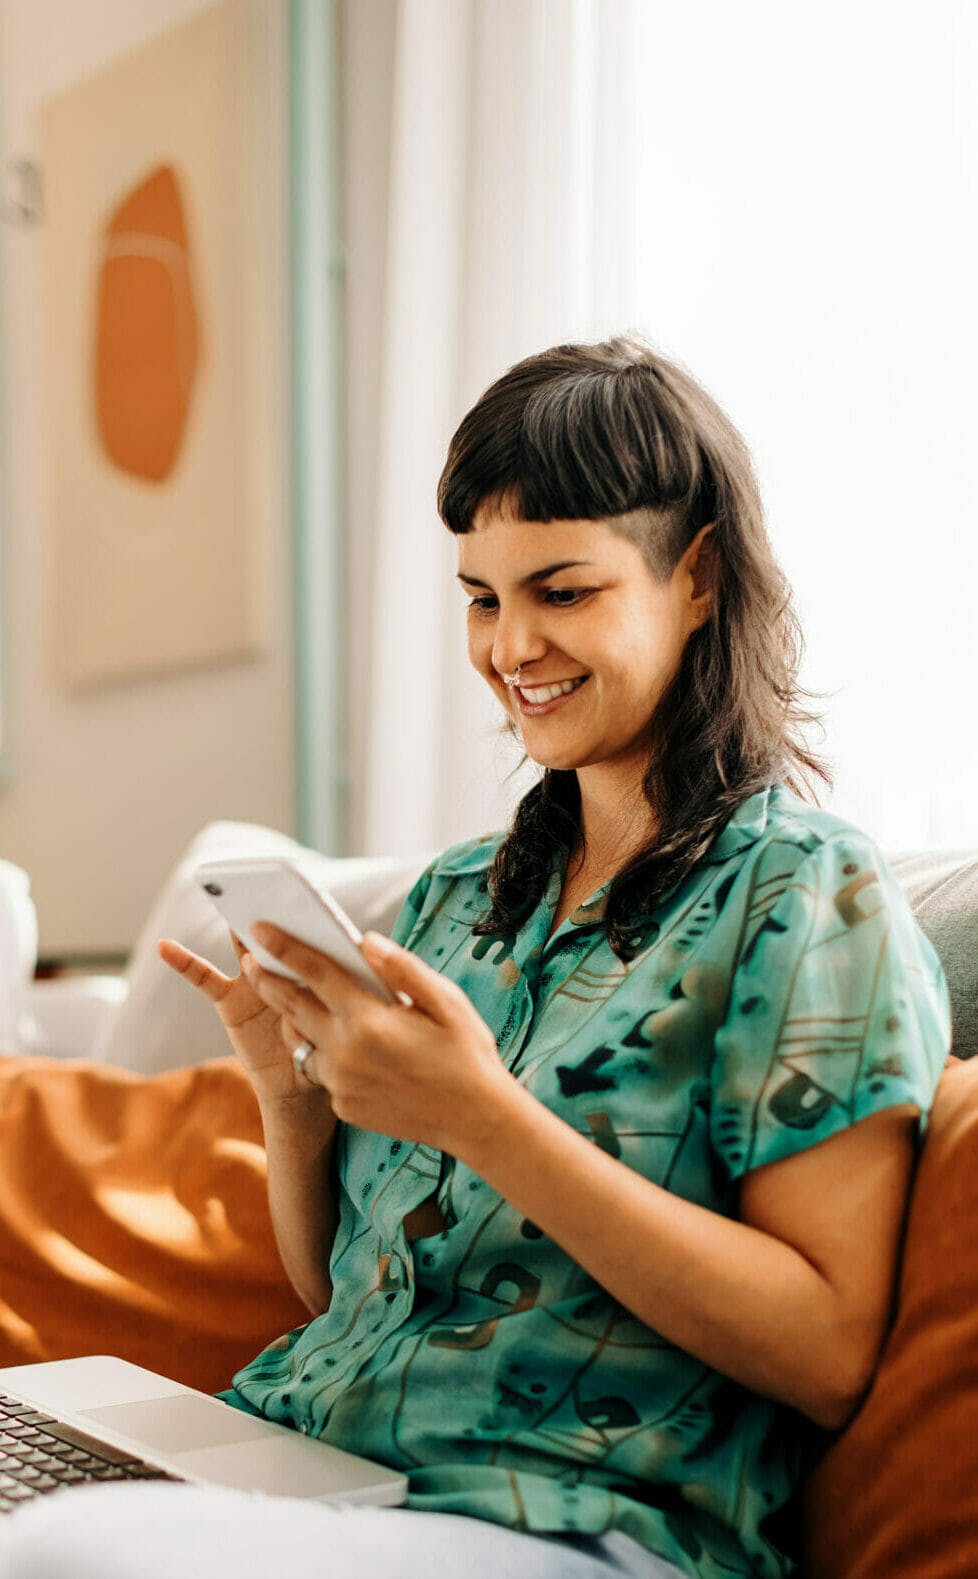 Young woman reading a text message on her smartphone. Happy young woman smiling cheerfully while holding a smartphone on her couch. Young woman sitting with a laptop in her living room.